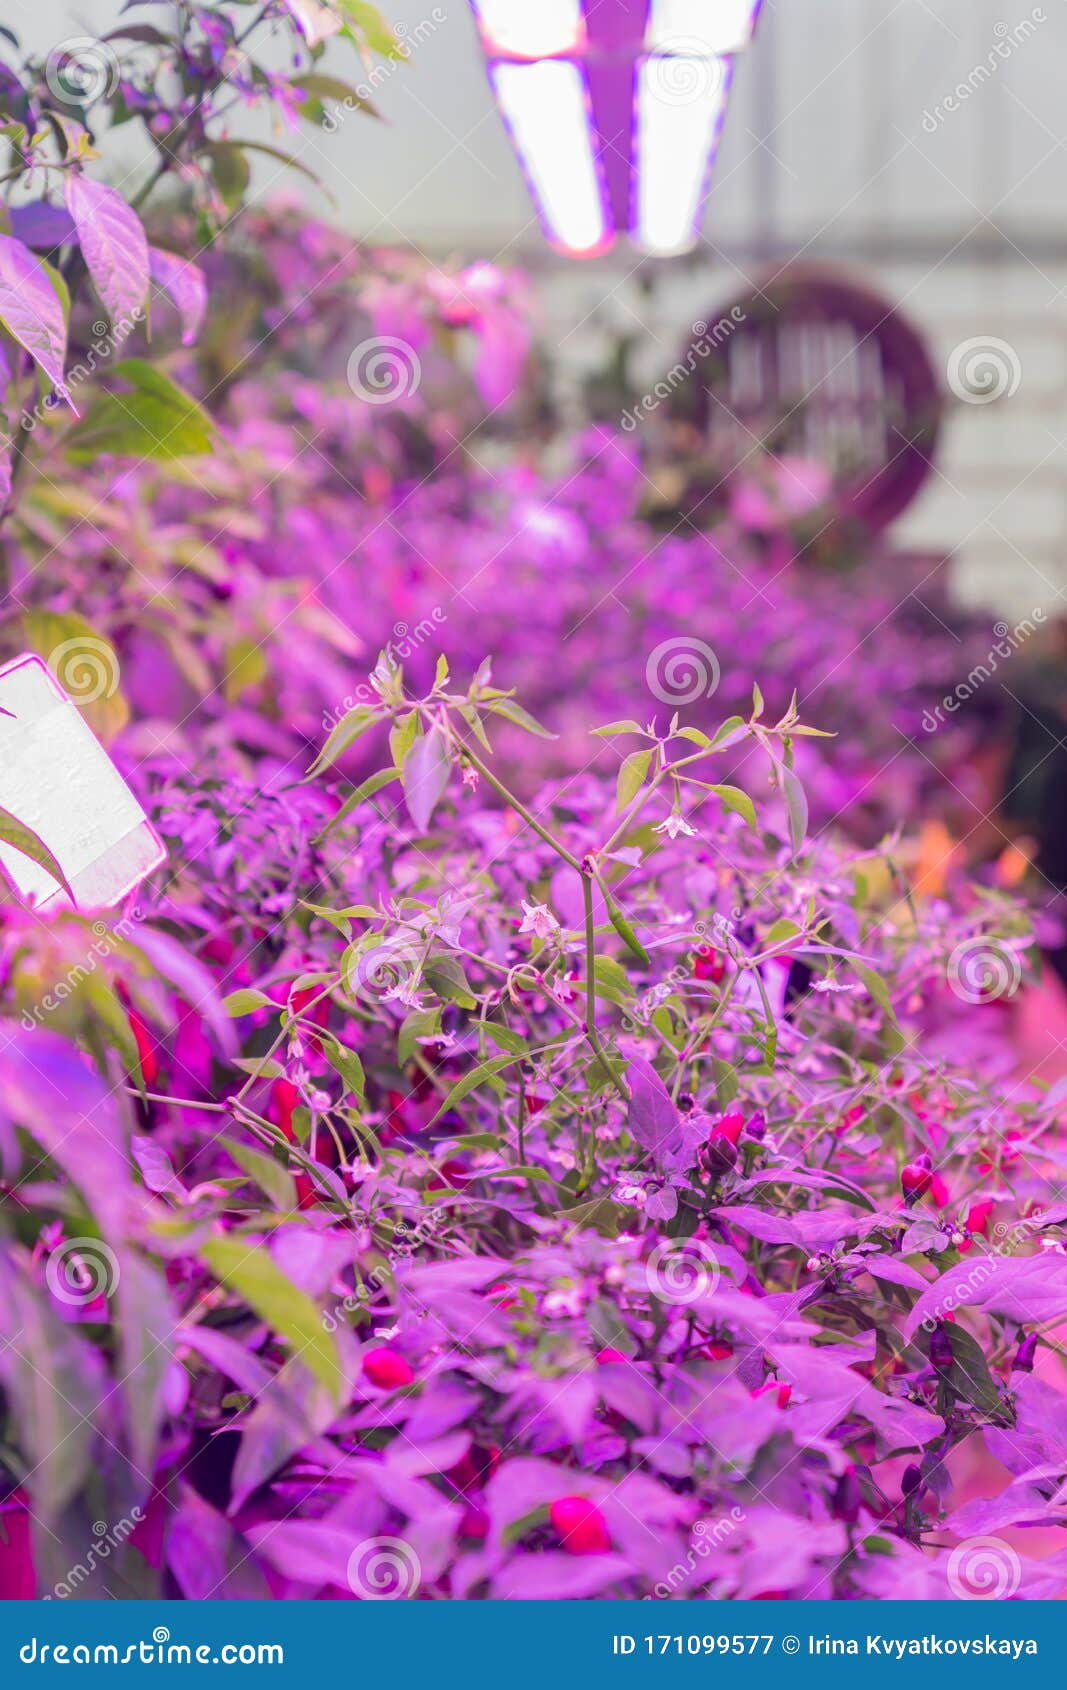 Growing Vegetables Under LED Grow Light Stock Image - Image of chile